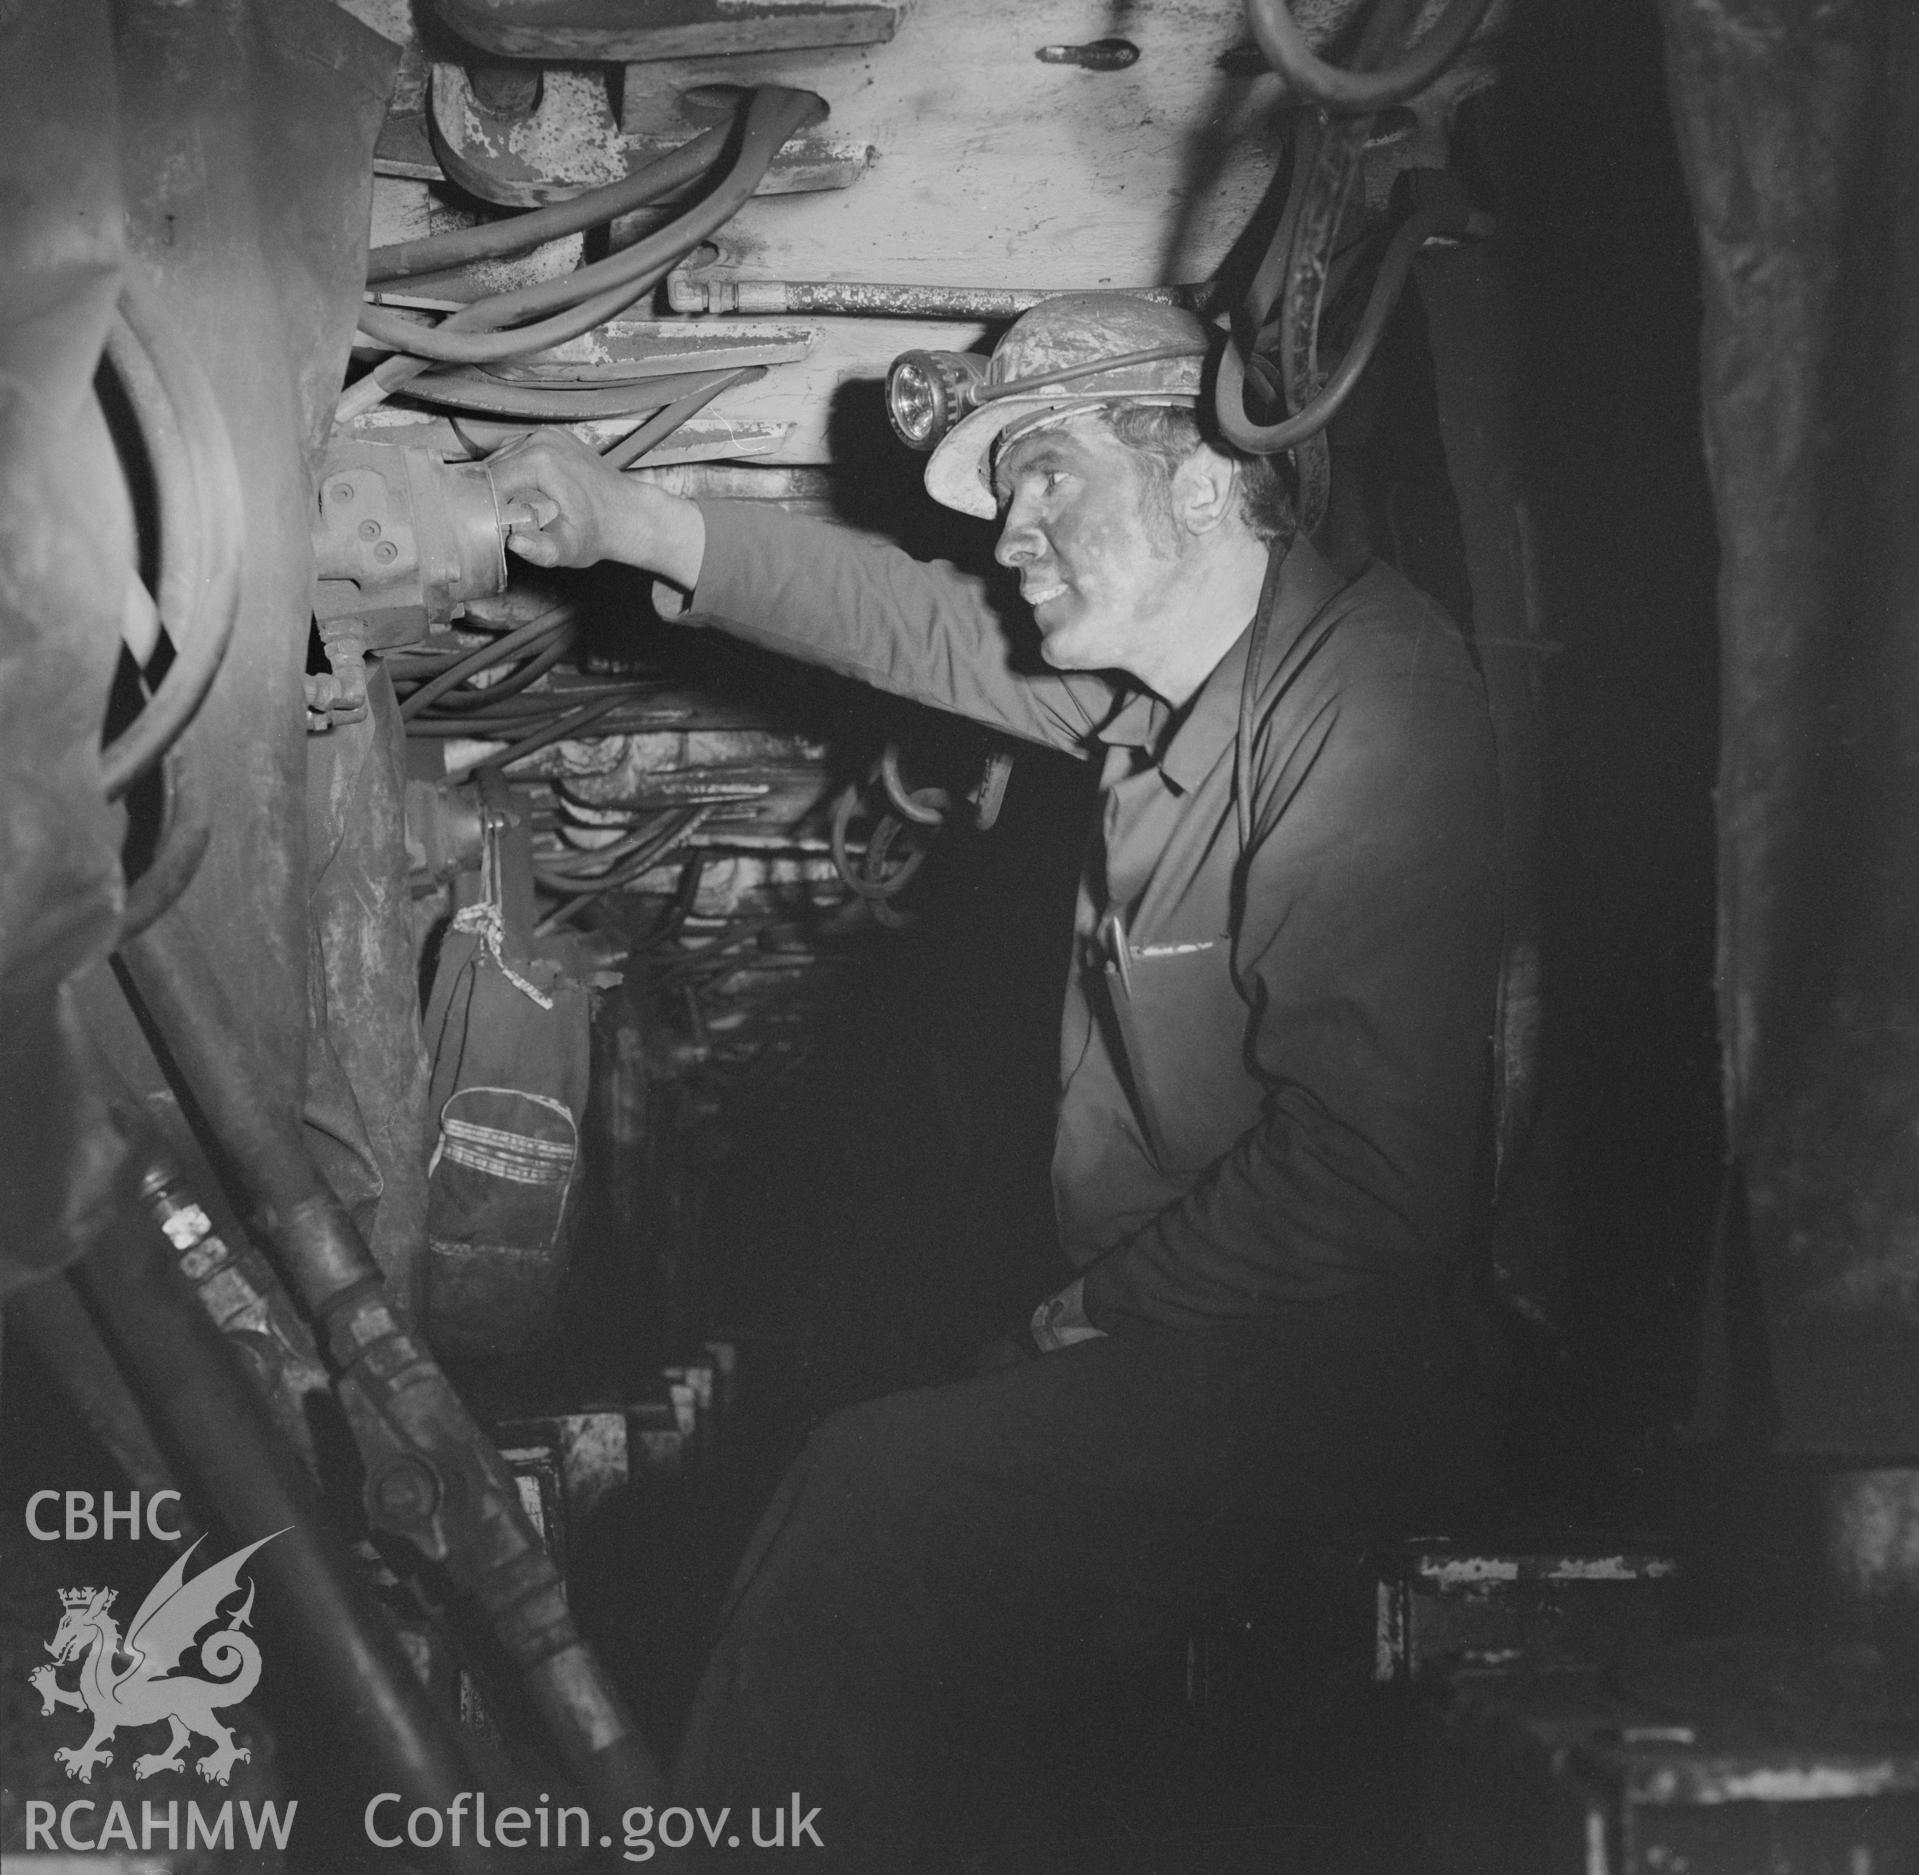 Digital copy of an acetate negative showing chocksman on coal face T Taff Colliery, from the John Cornwell Collection.